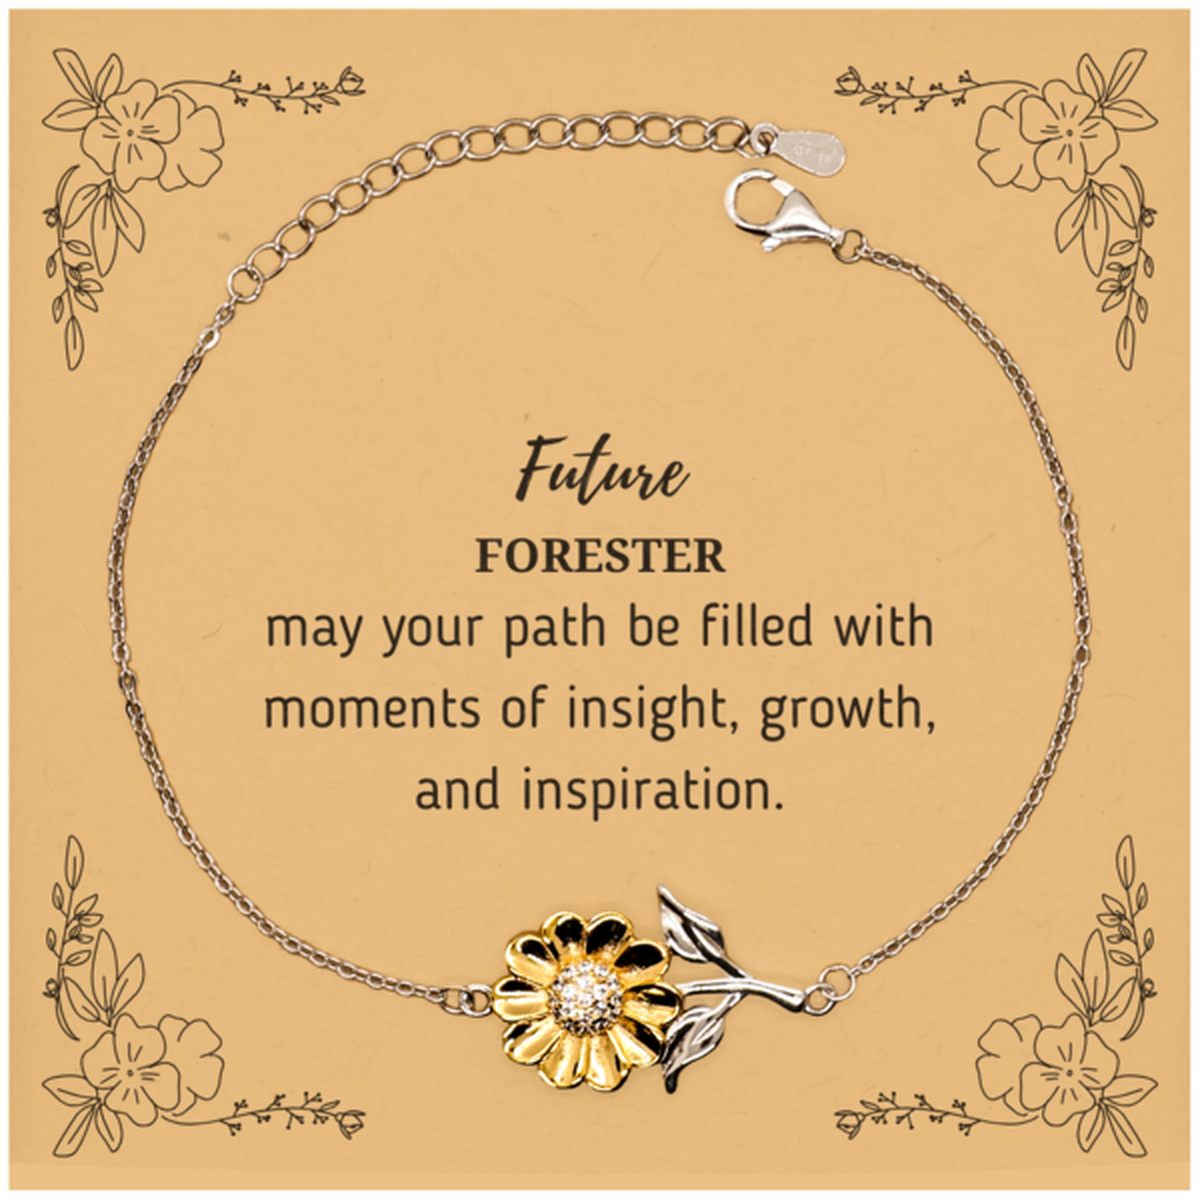 Future Forester Gifts, May your path be filled with moments of insight, Graduation Gifts for New Forester, Christmas Unique Sunflower Bracelet For Men, Women, Friends